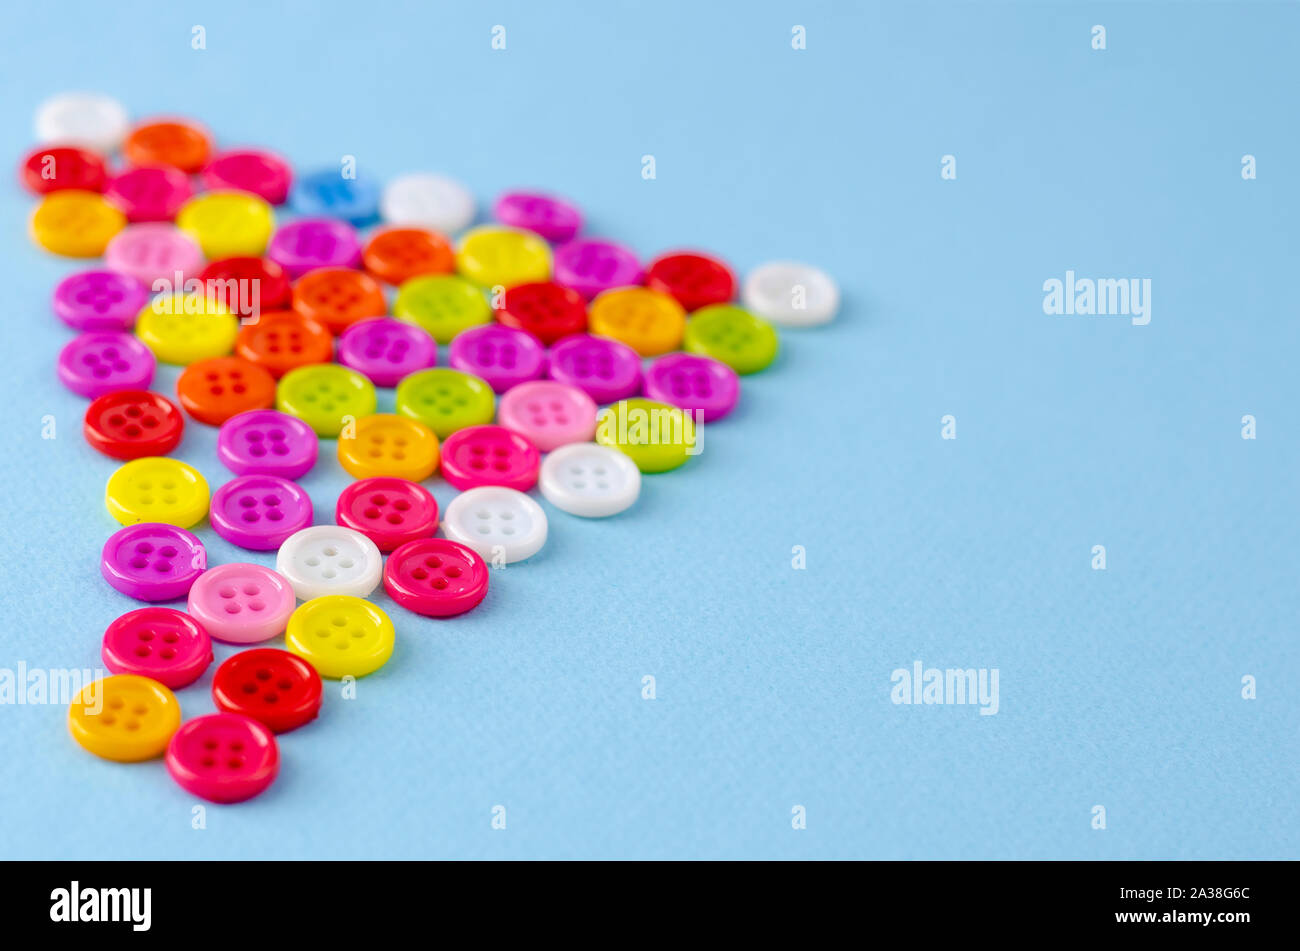 Many colorful buttons on blue background. Selective focus. Copy space Stock Photo